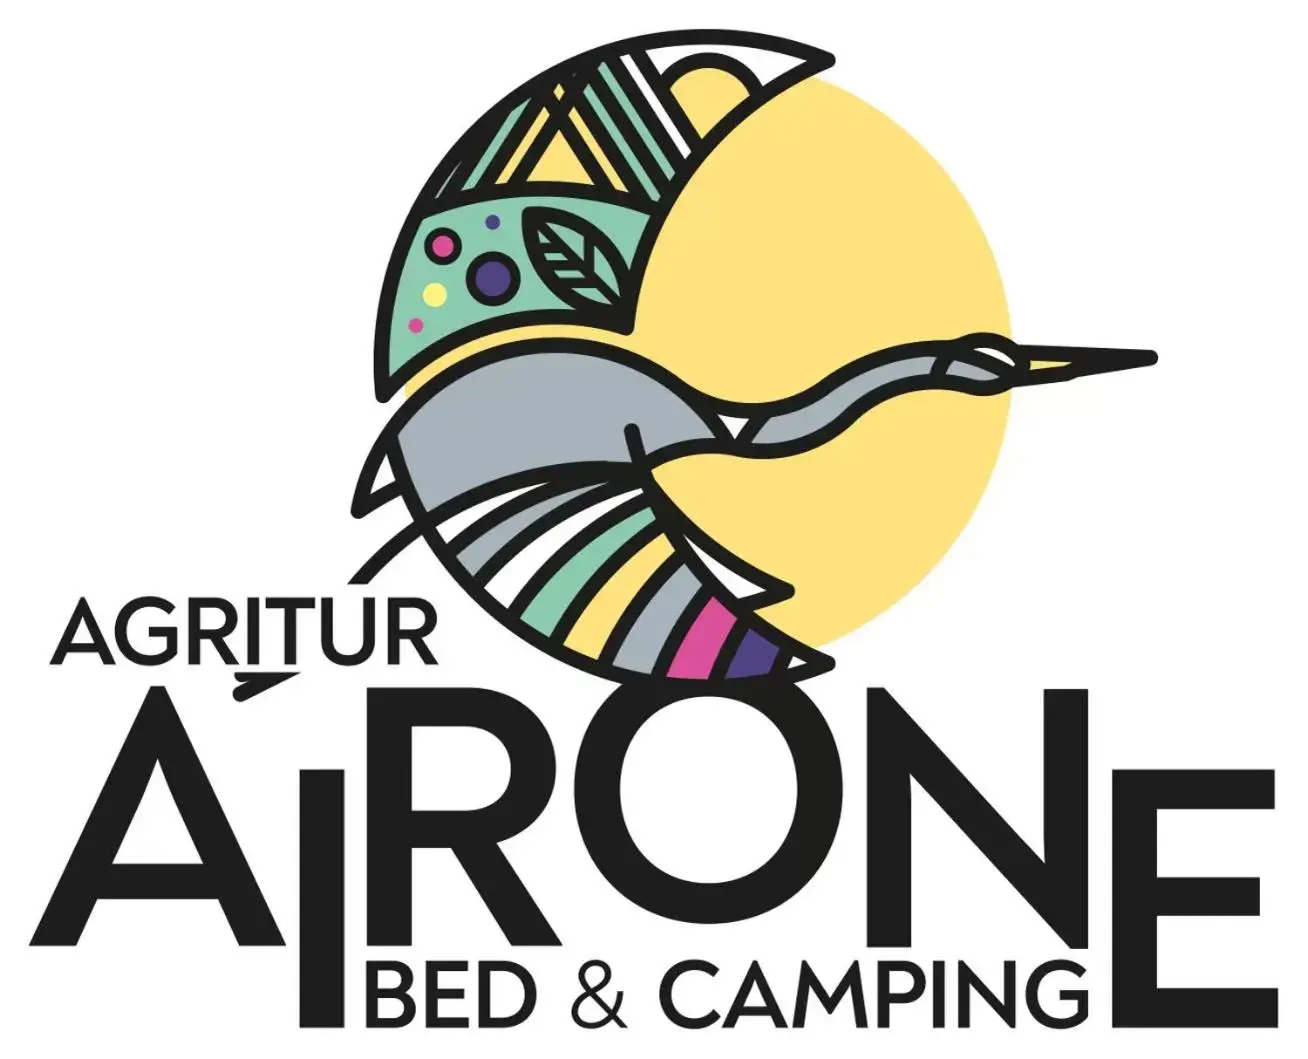 Property logo or sign in Agritur Airone Bed & Camping